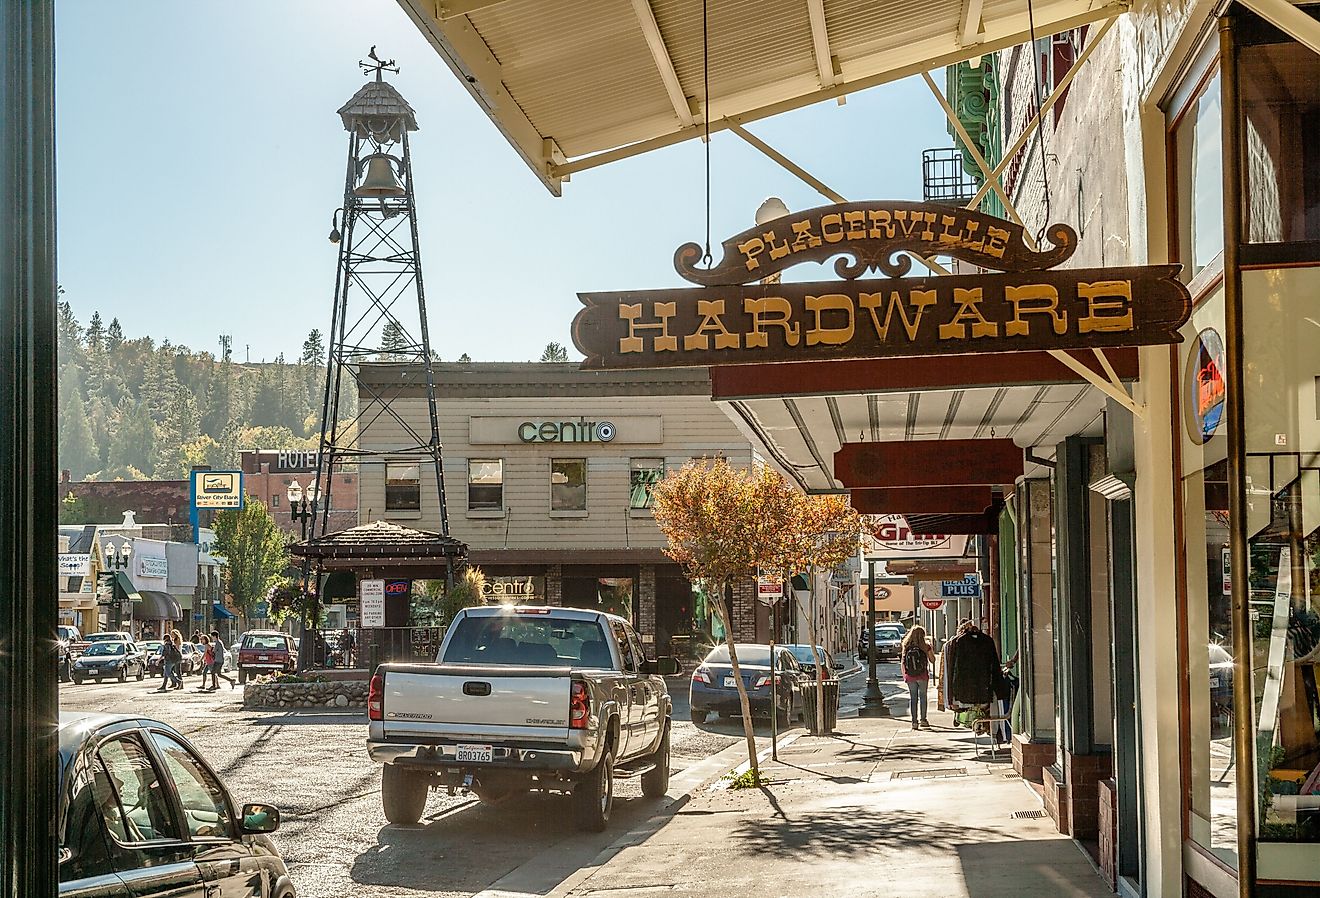 Mainstreet in Historic town of Placerville with Bell Tower, California. Image credit Laurens Hoddenbagh via Shutterstock